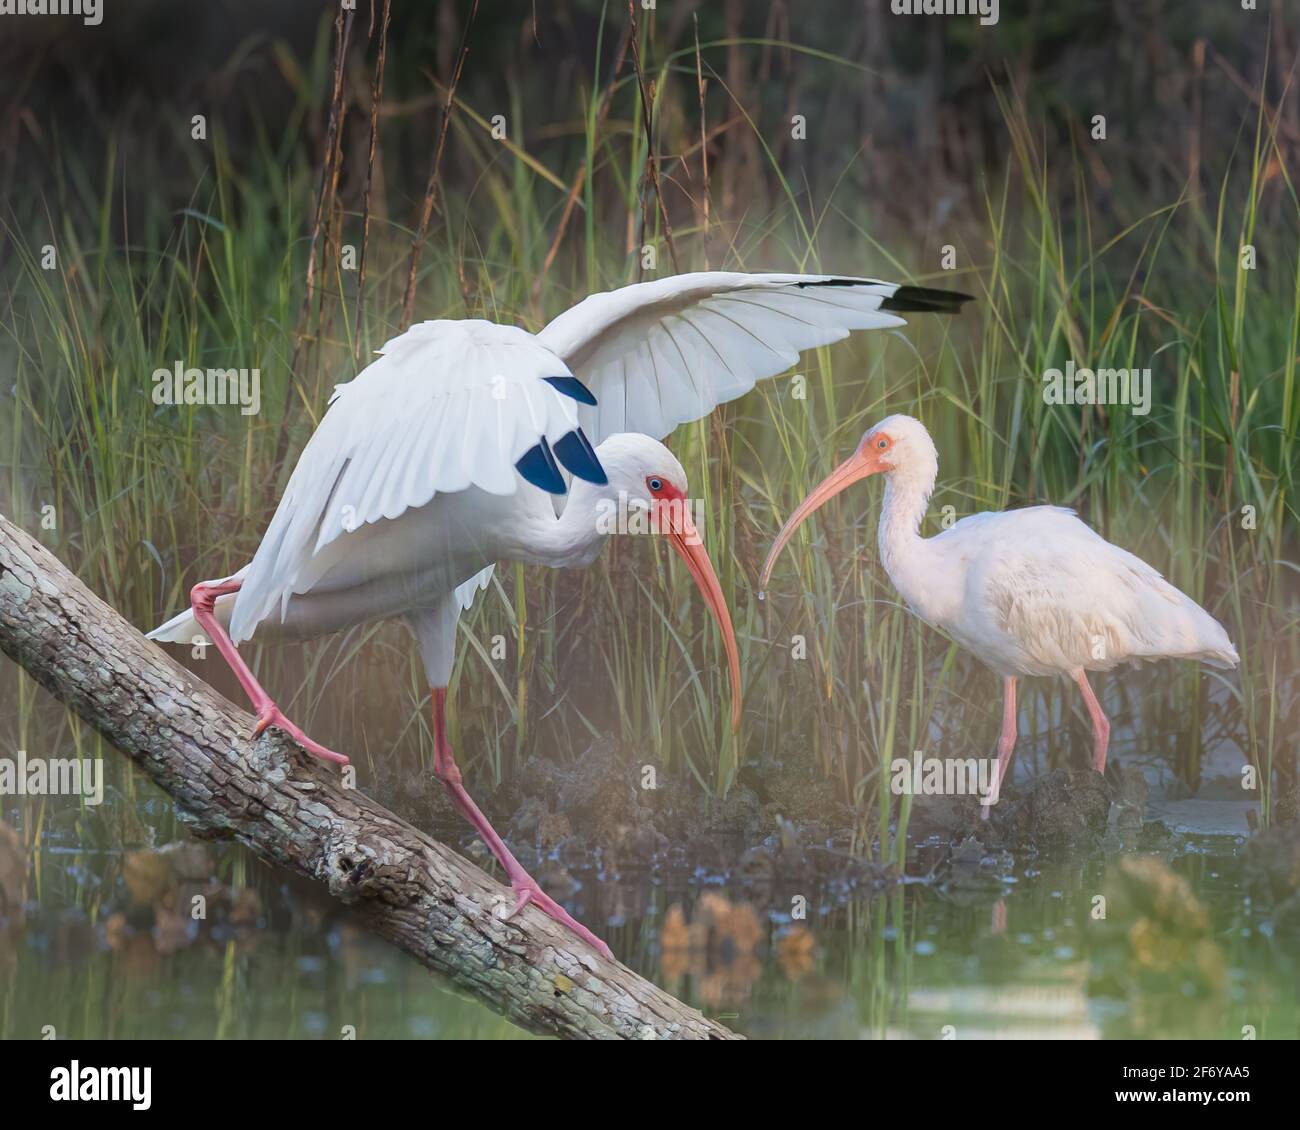 A double exposure of two white ibises at the water's edge. Stock Photo